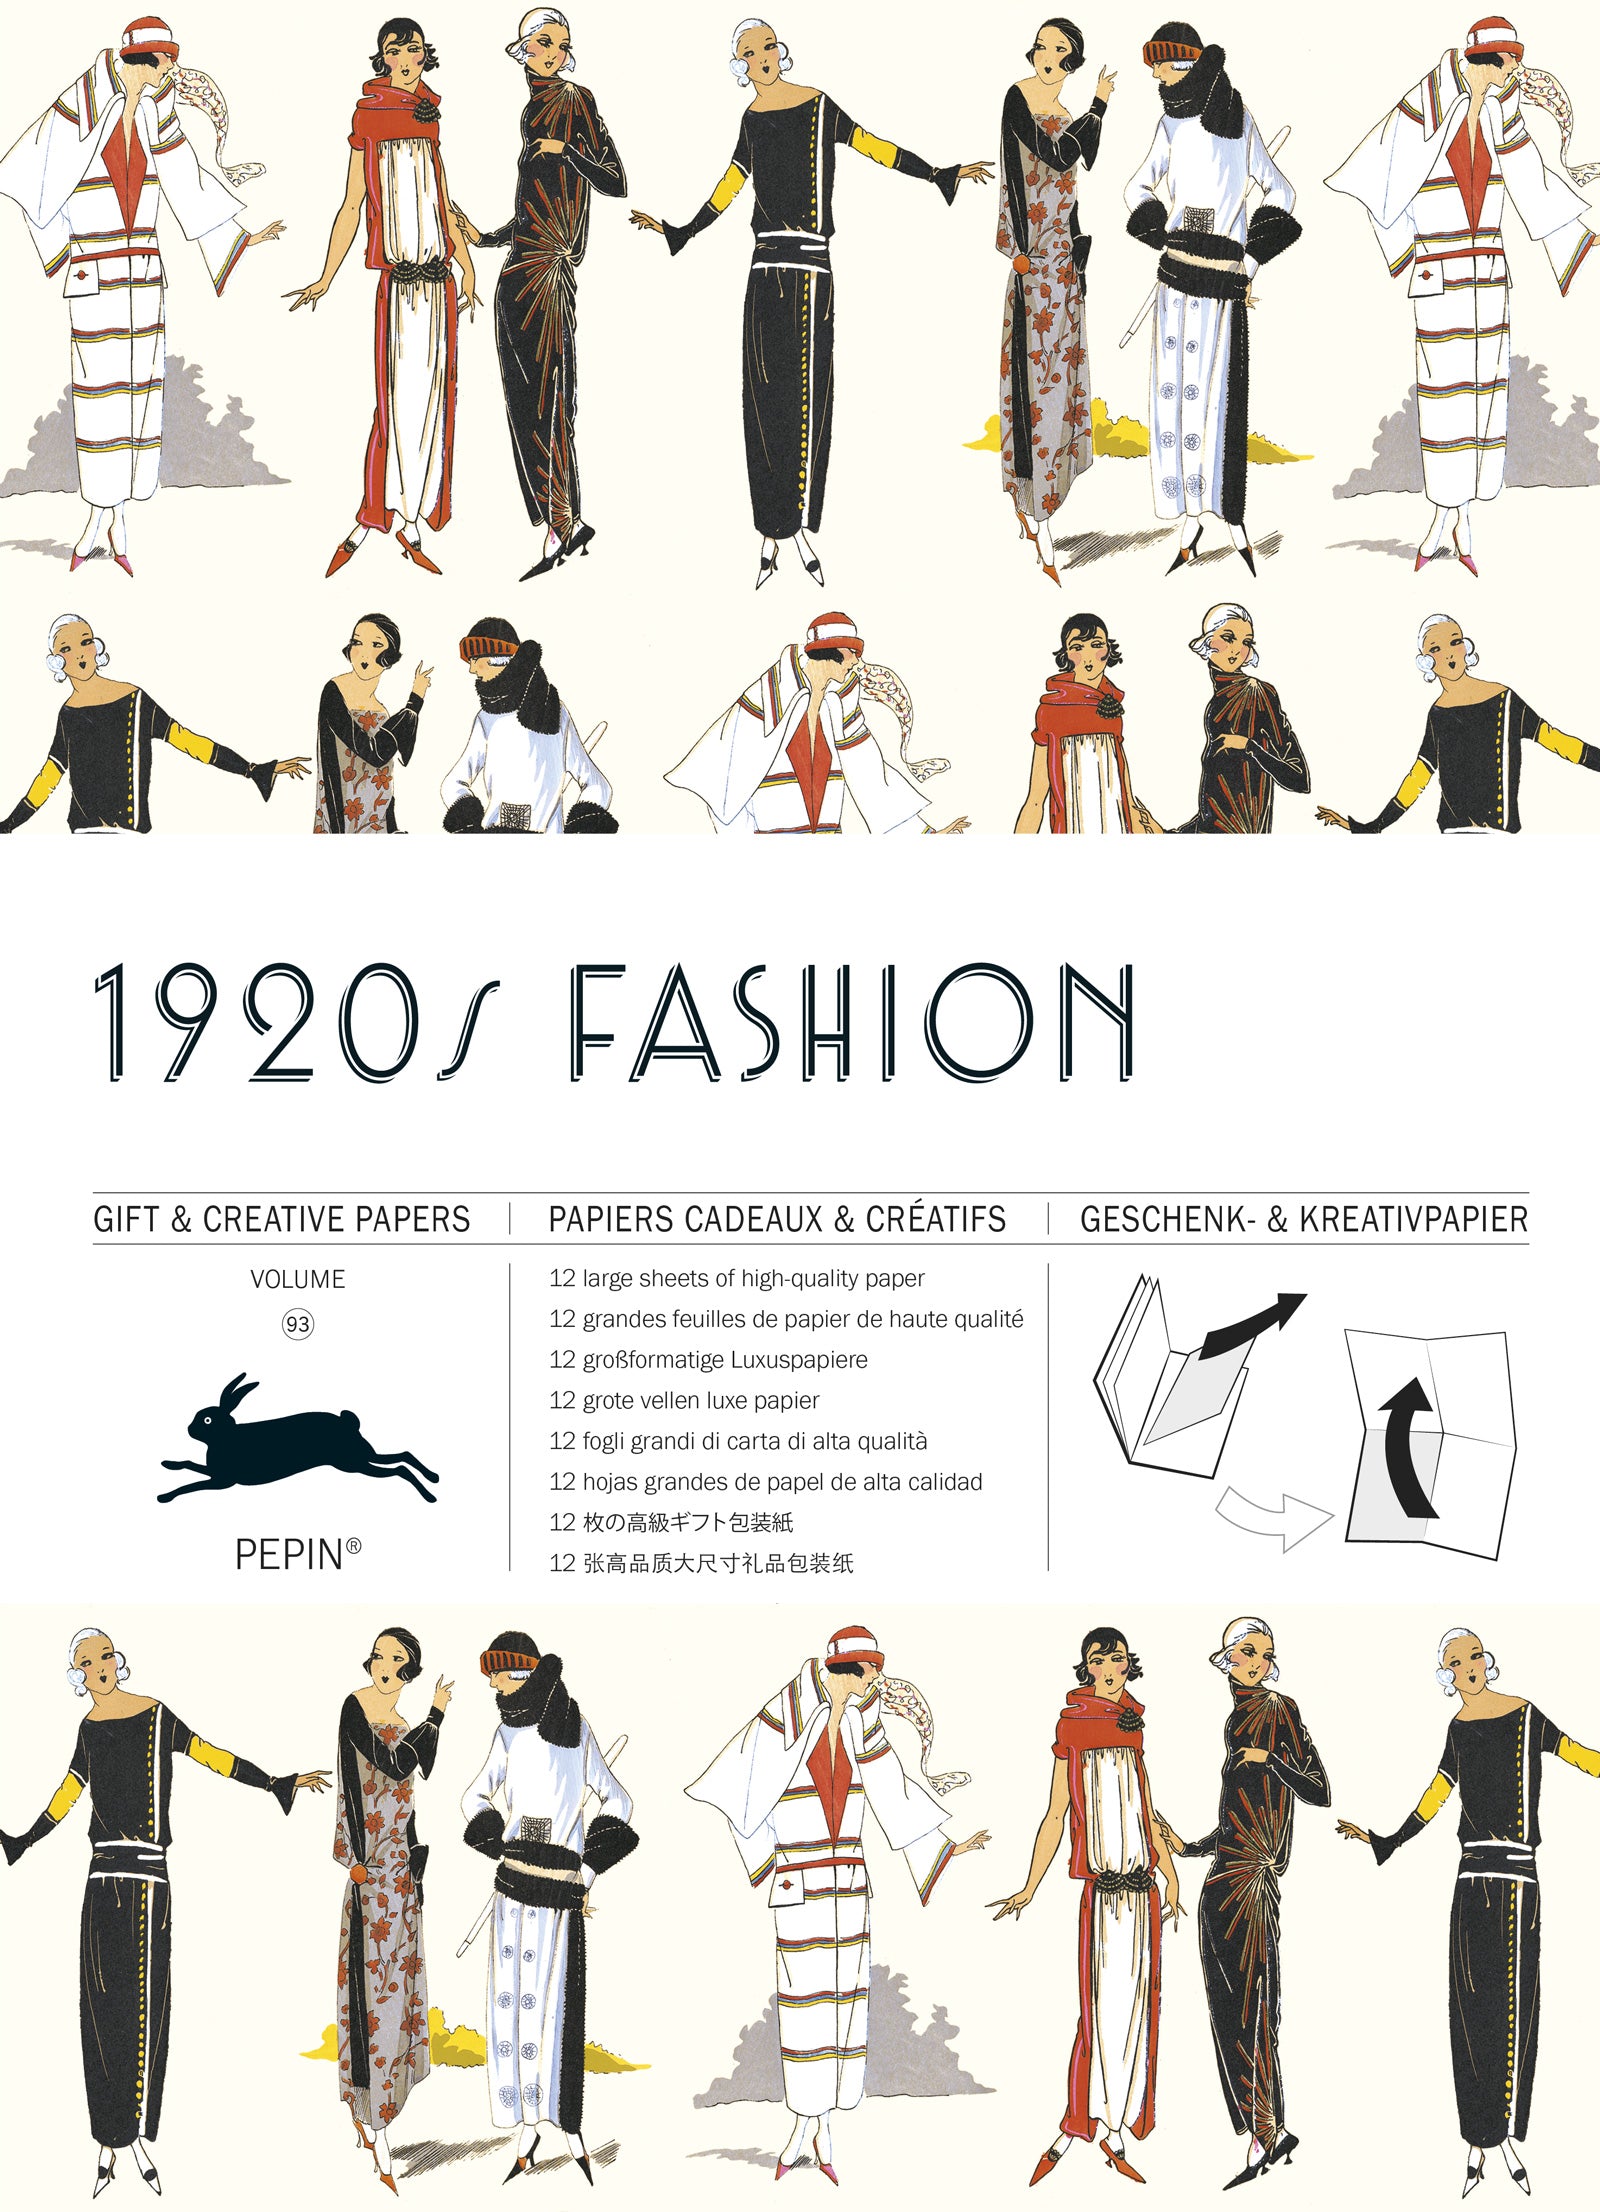 Gift &amp; creative papers - 1920s Fashion